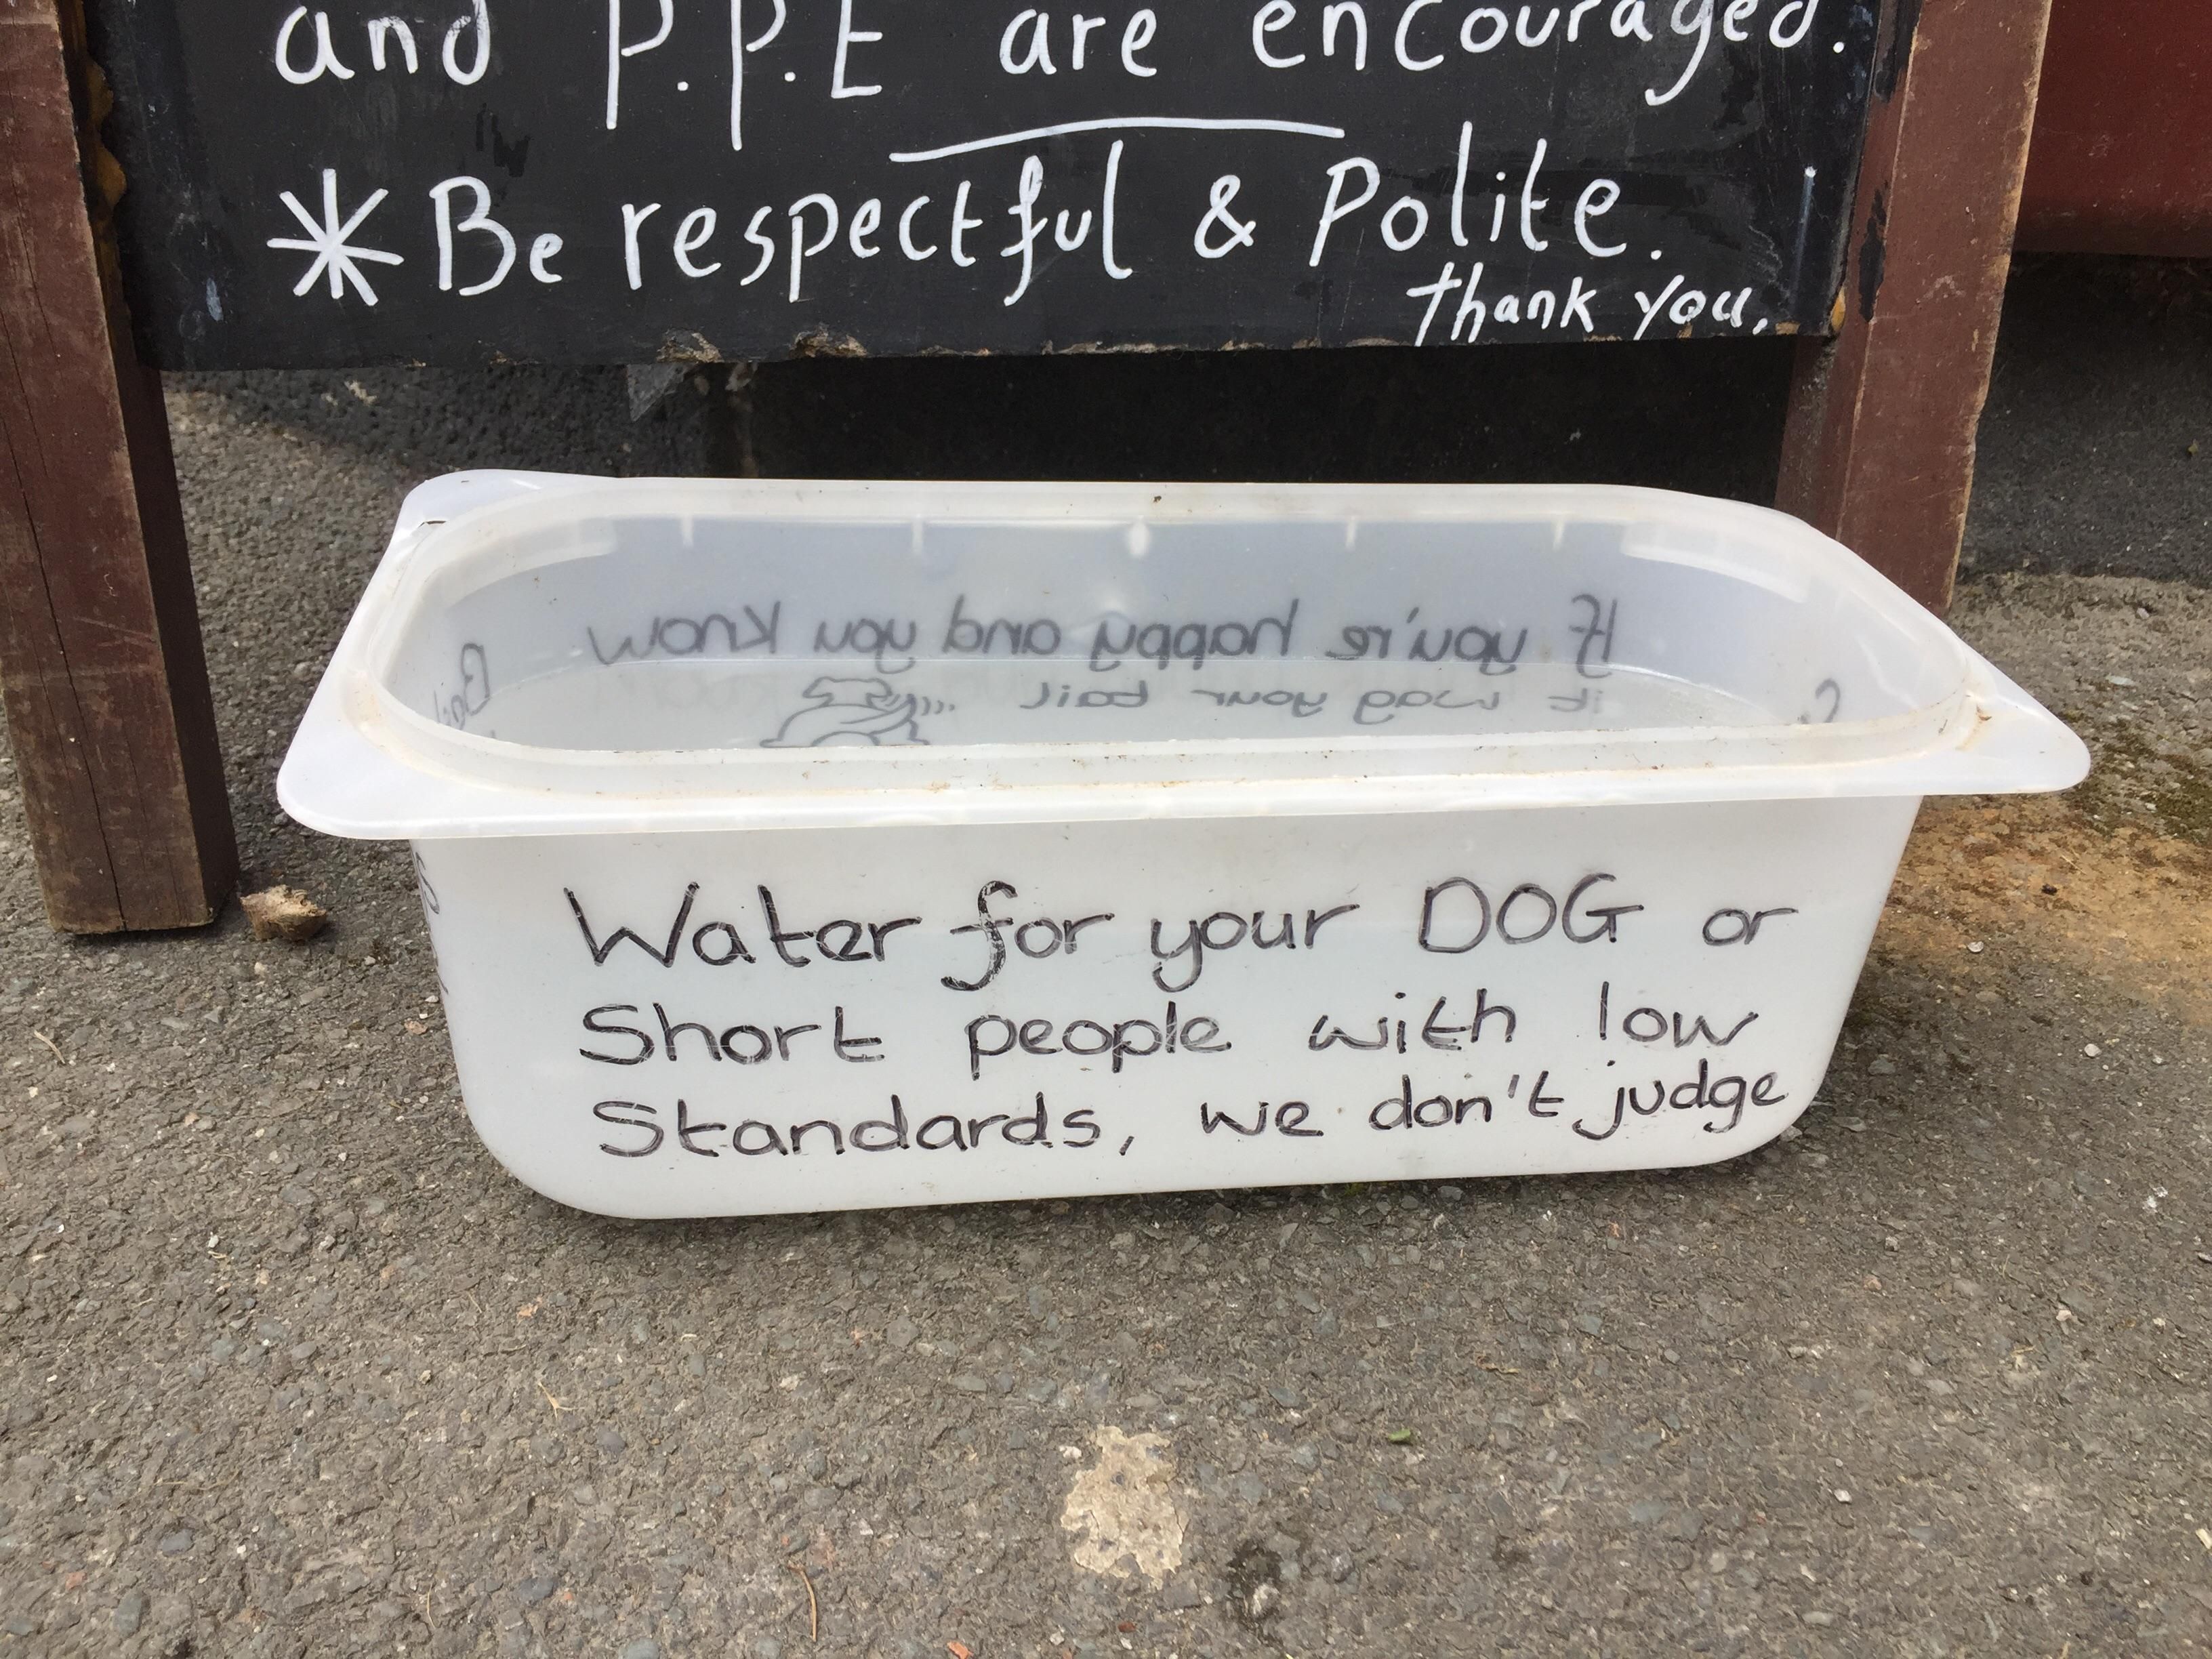 Found this outside a shop on holiday in Lake District, England